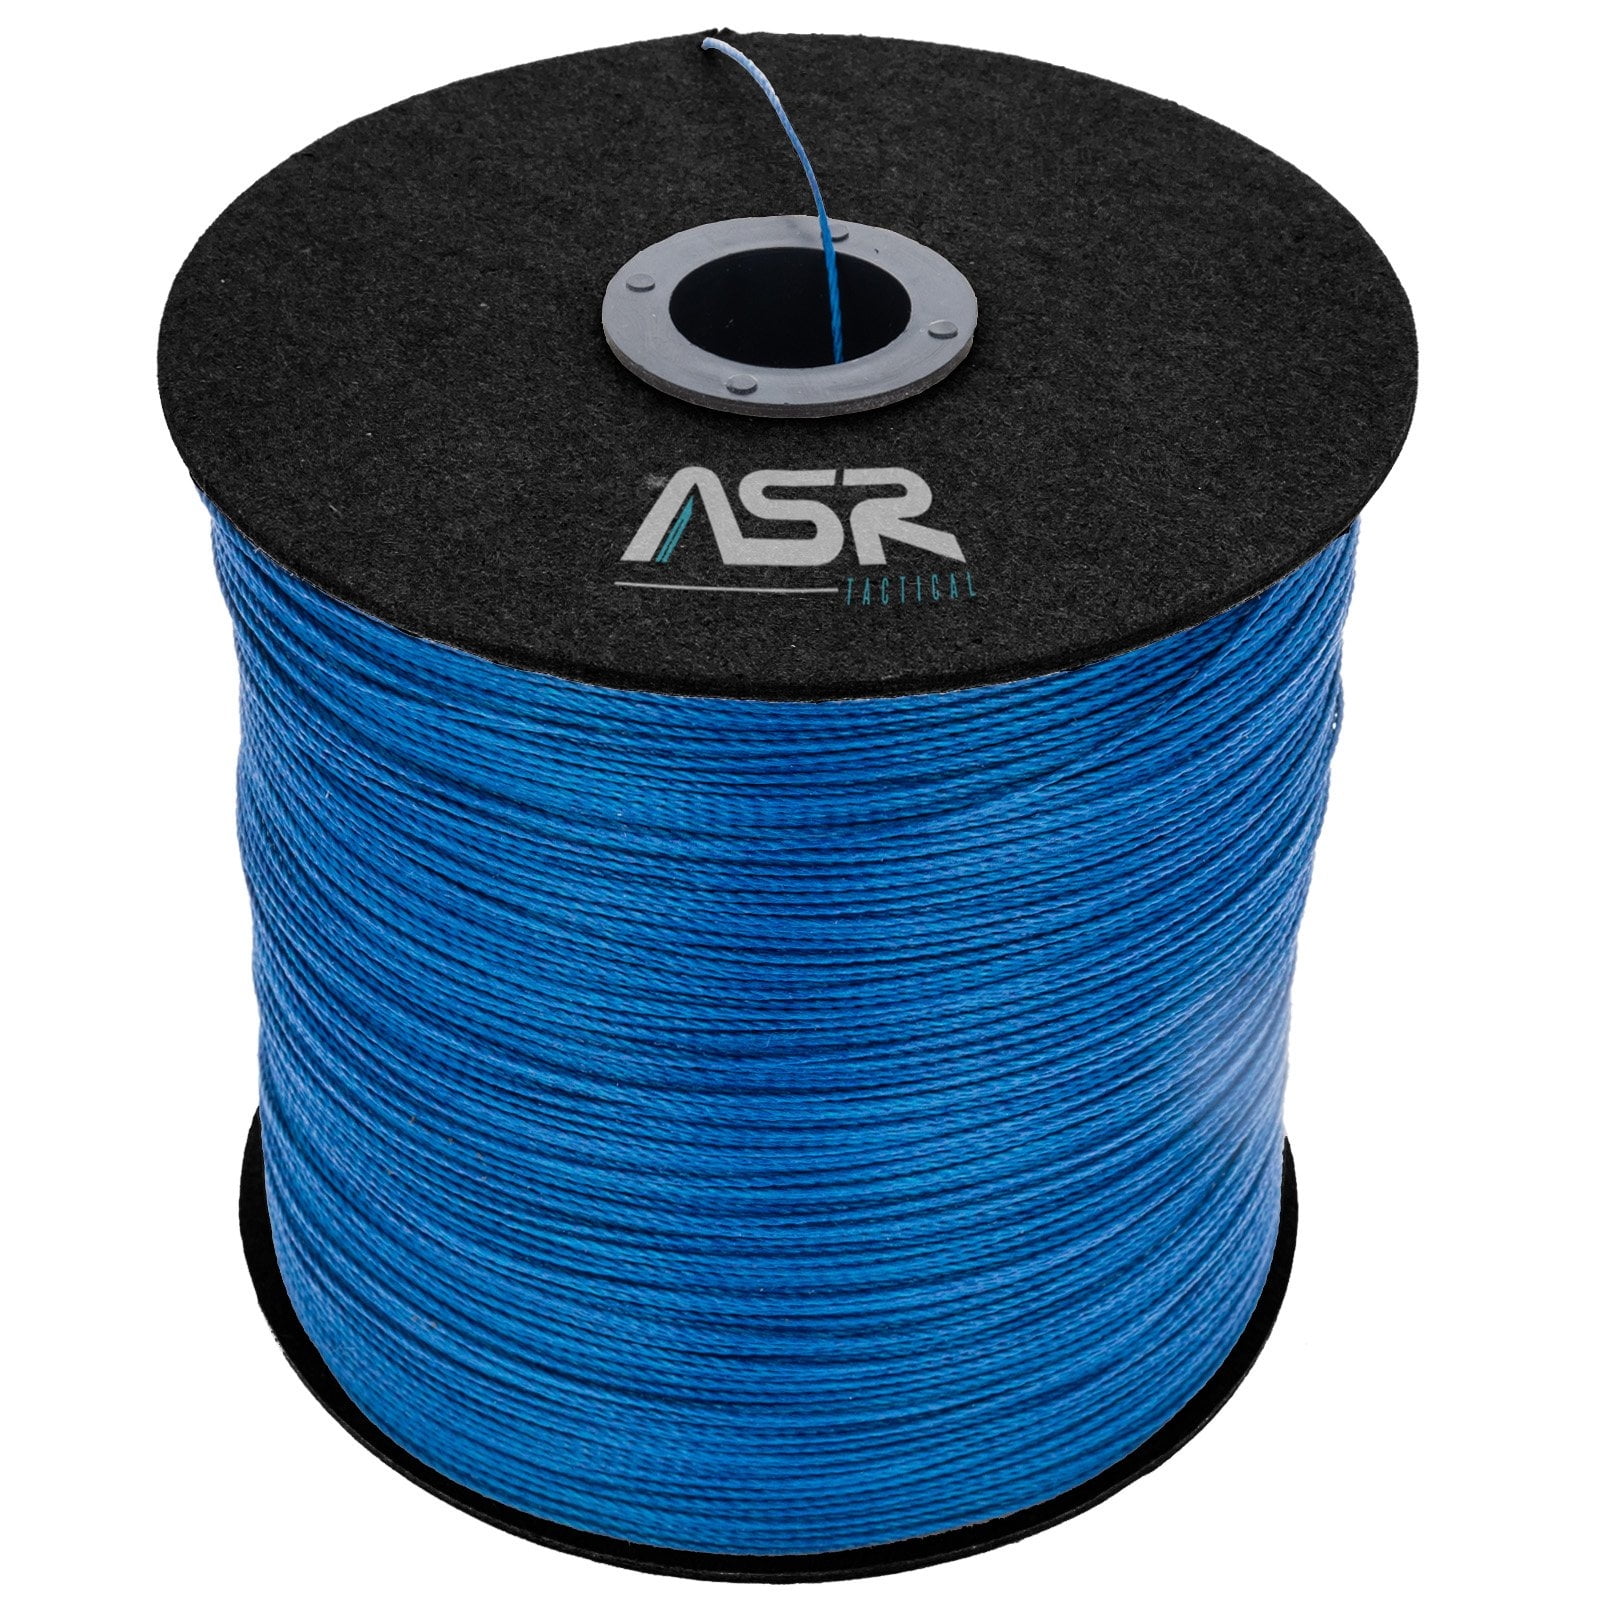 ASR Tactical Braided Kevlar 200lb Strength Survival Cord Rope